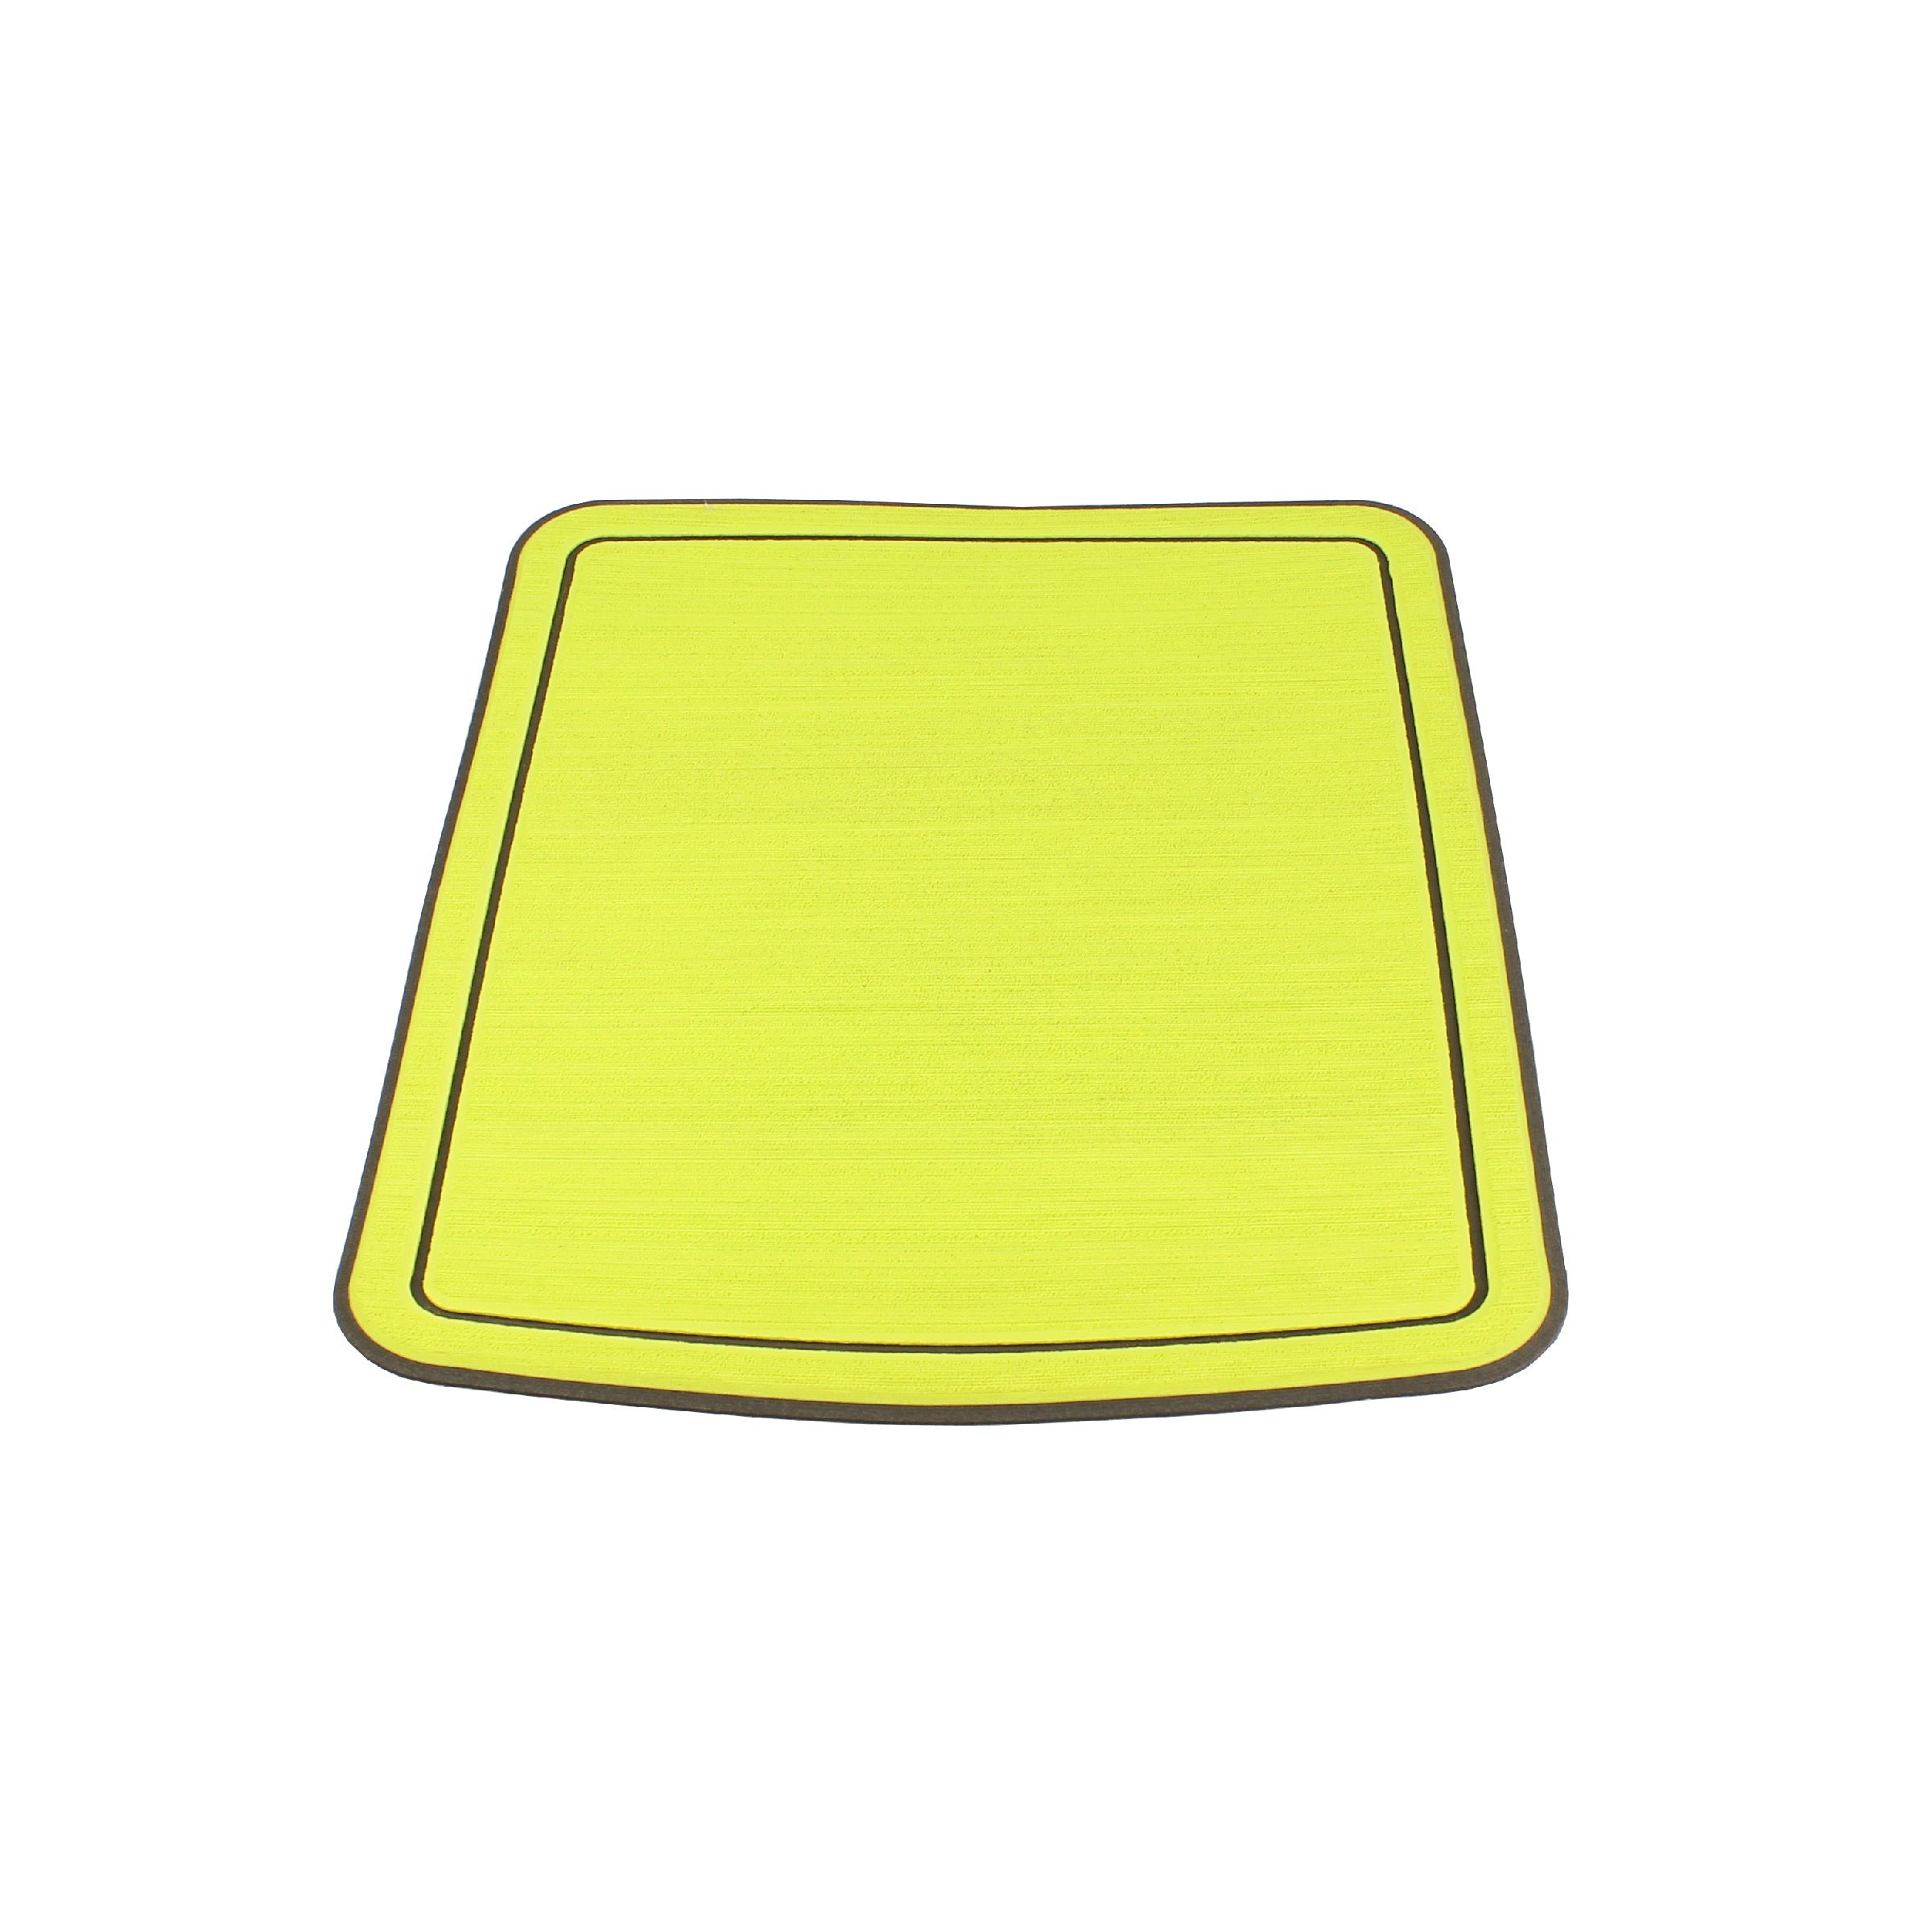 Party Boat Table Center Foam Neon Yellow Mats | ITC Shop Now